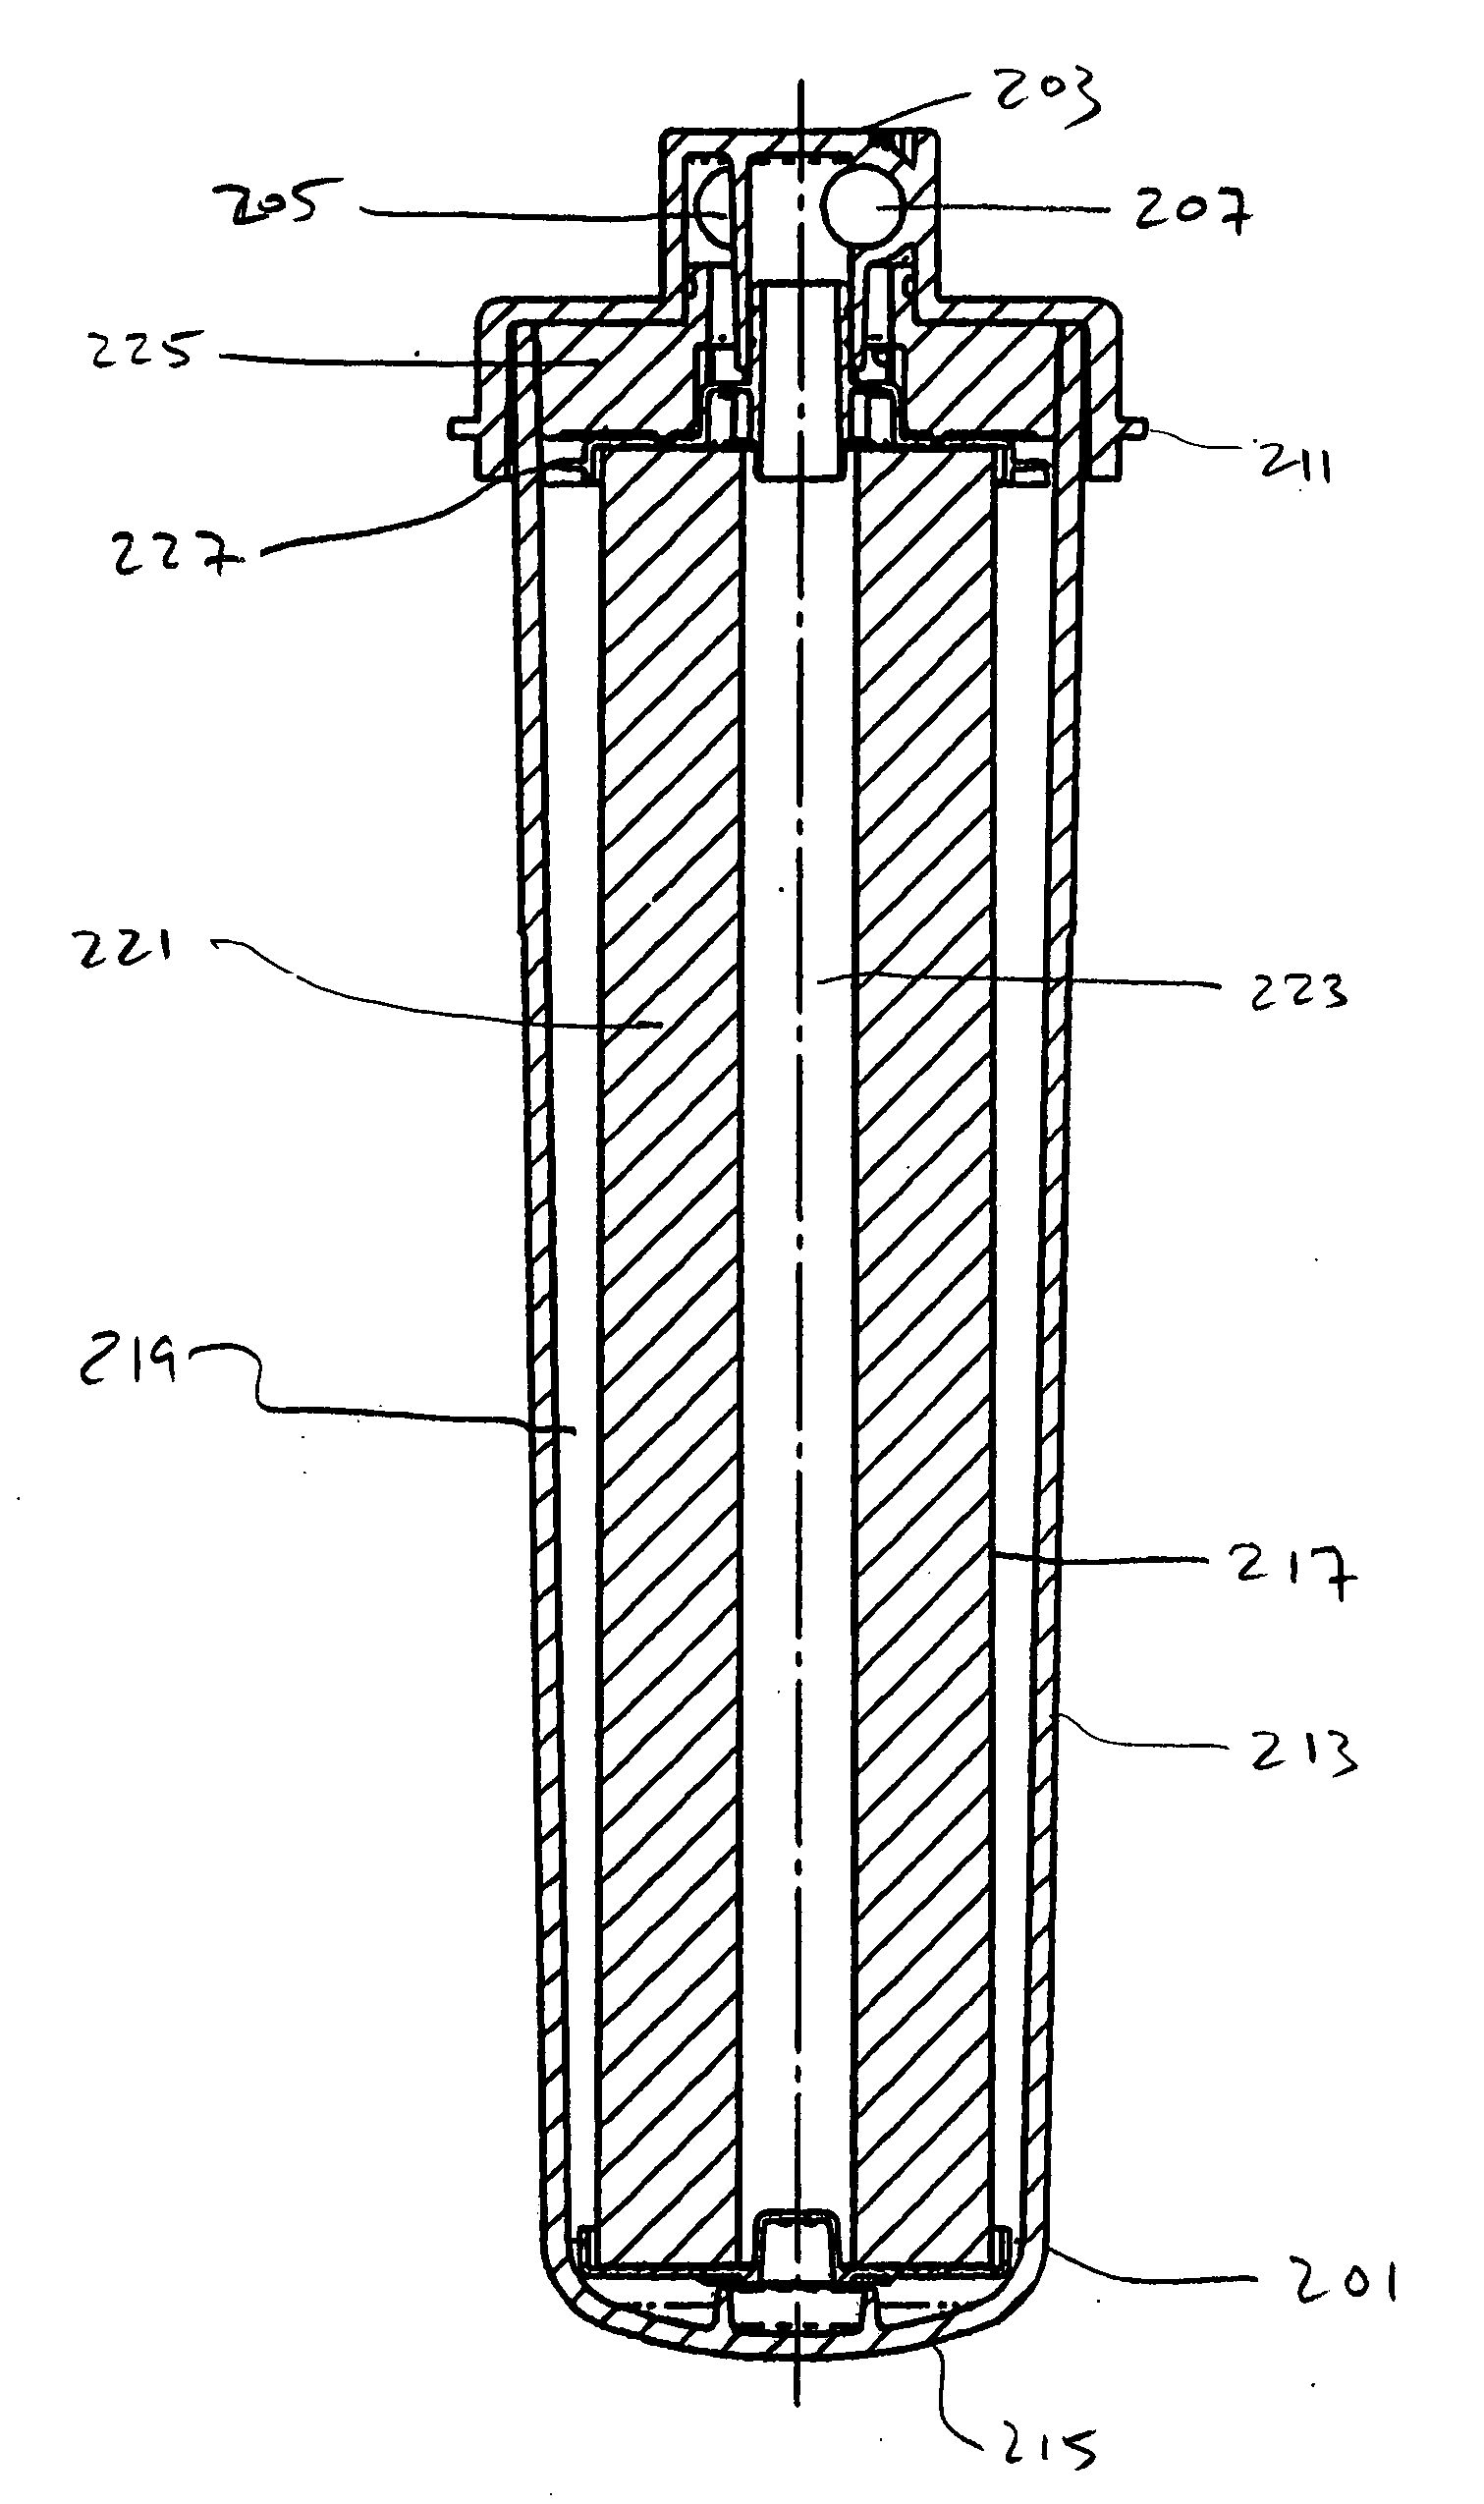 Modular fluid purification system and components thereof